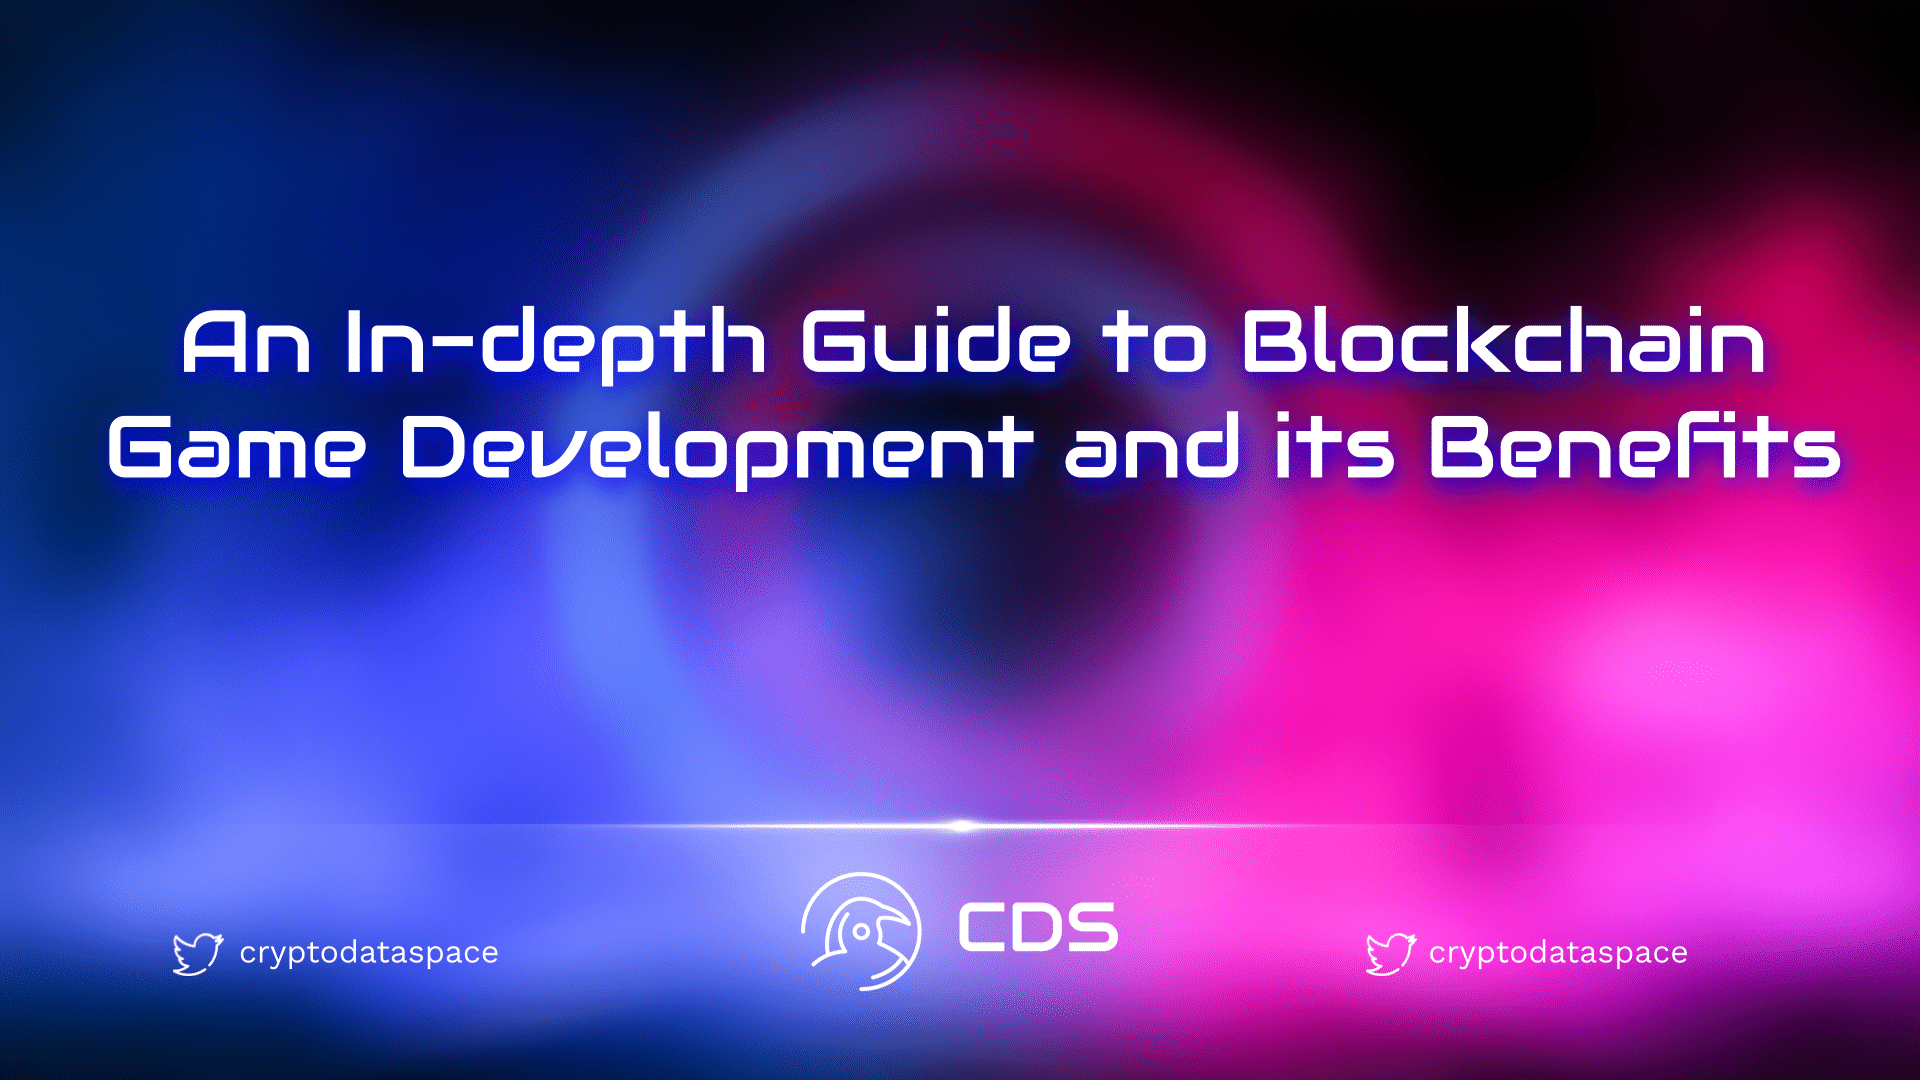 An In-depth Guide to Blockchain Game Development and its Benefits